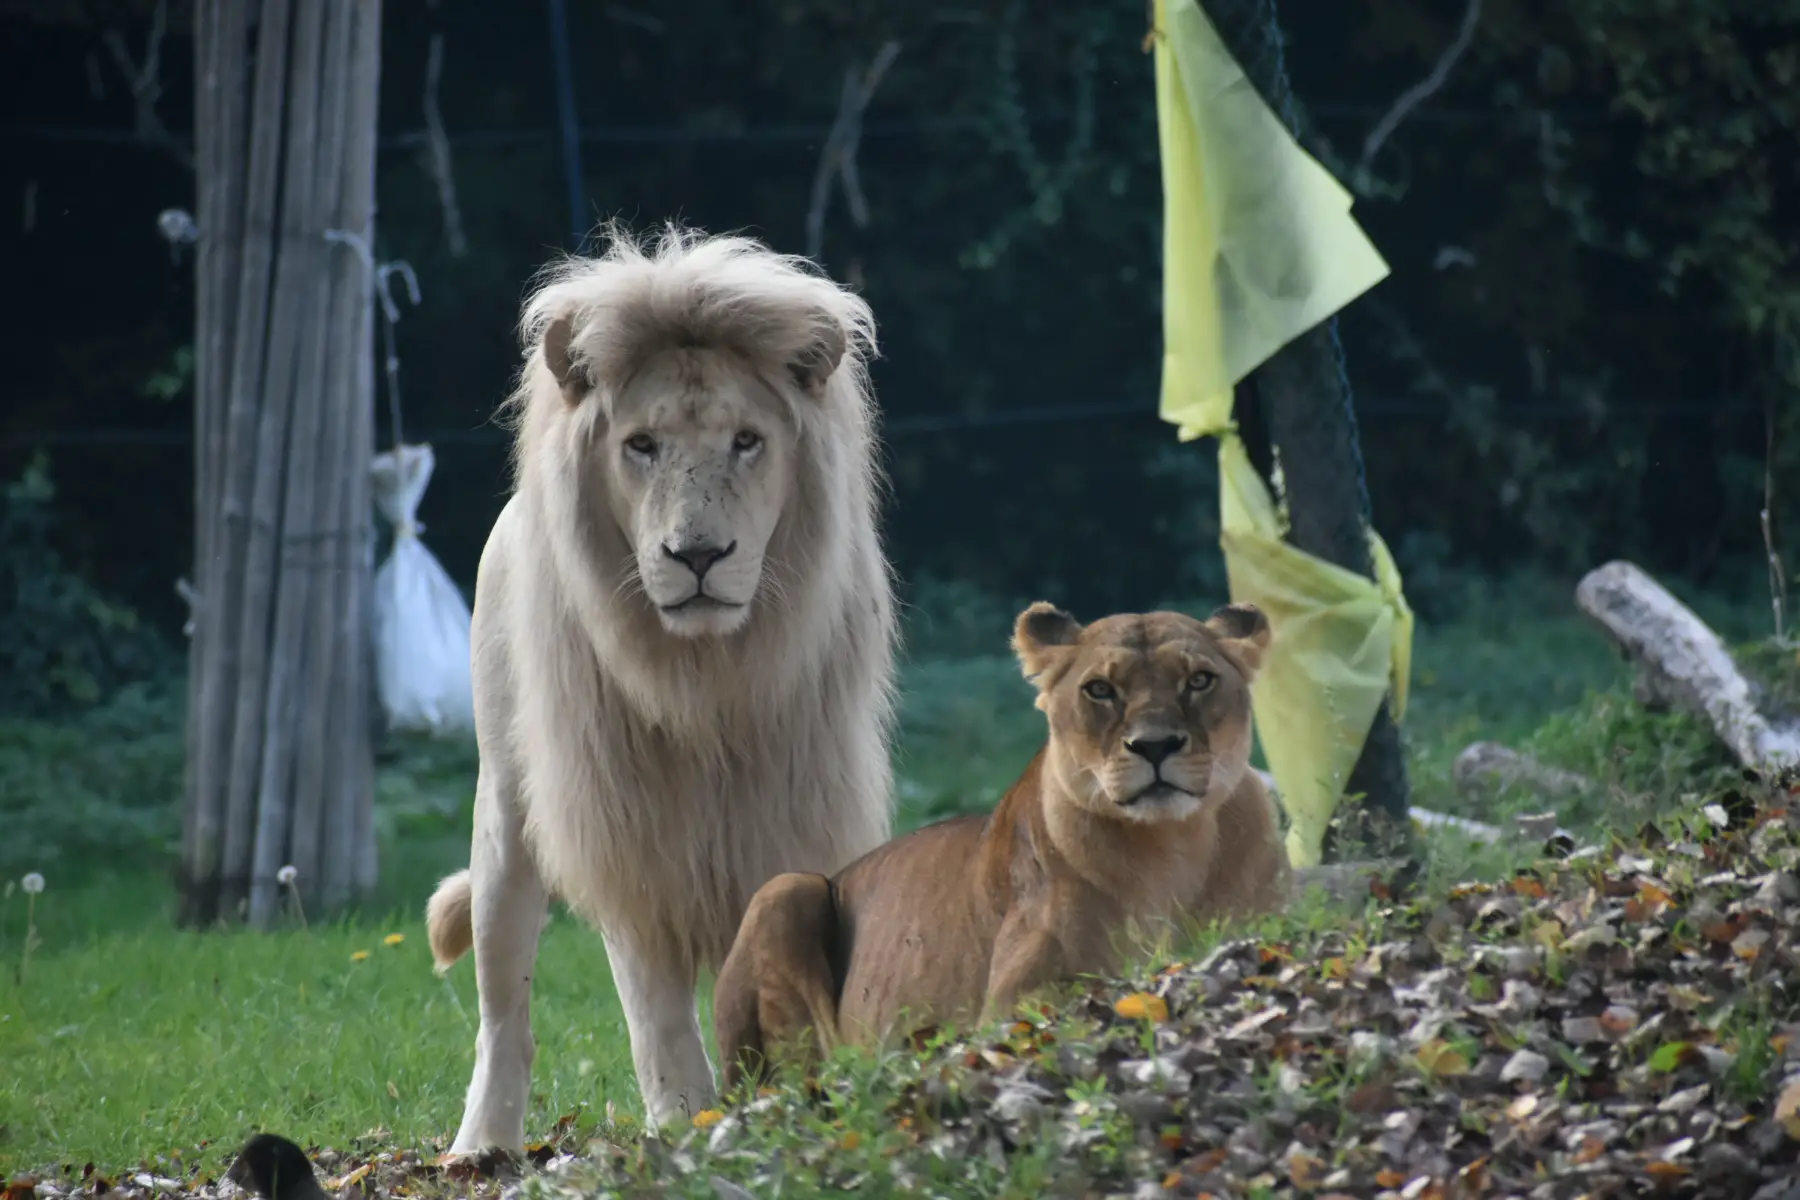 A lion and lioness relaxing in the wild at Parco Natura Viva in Italy